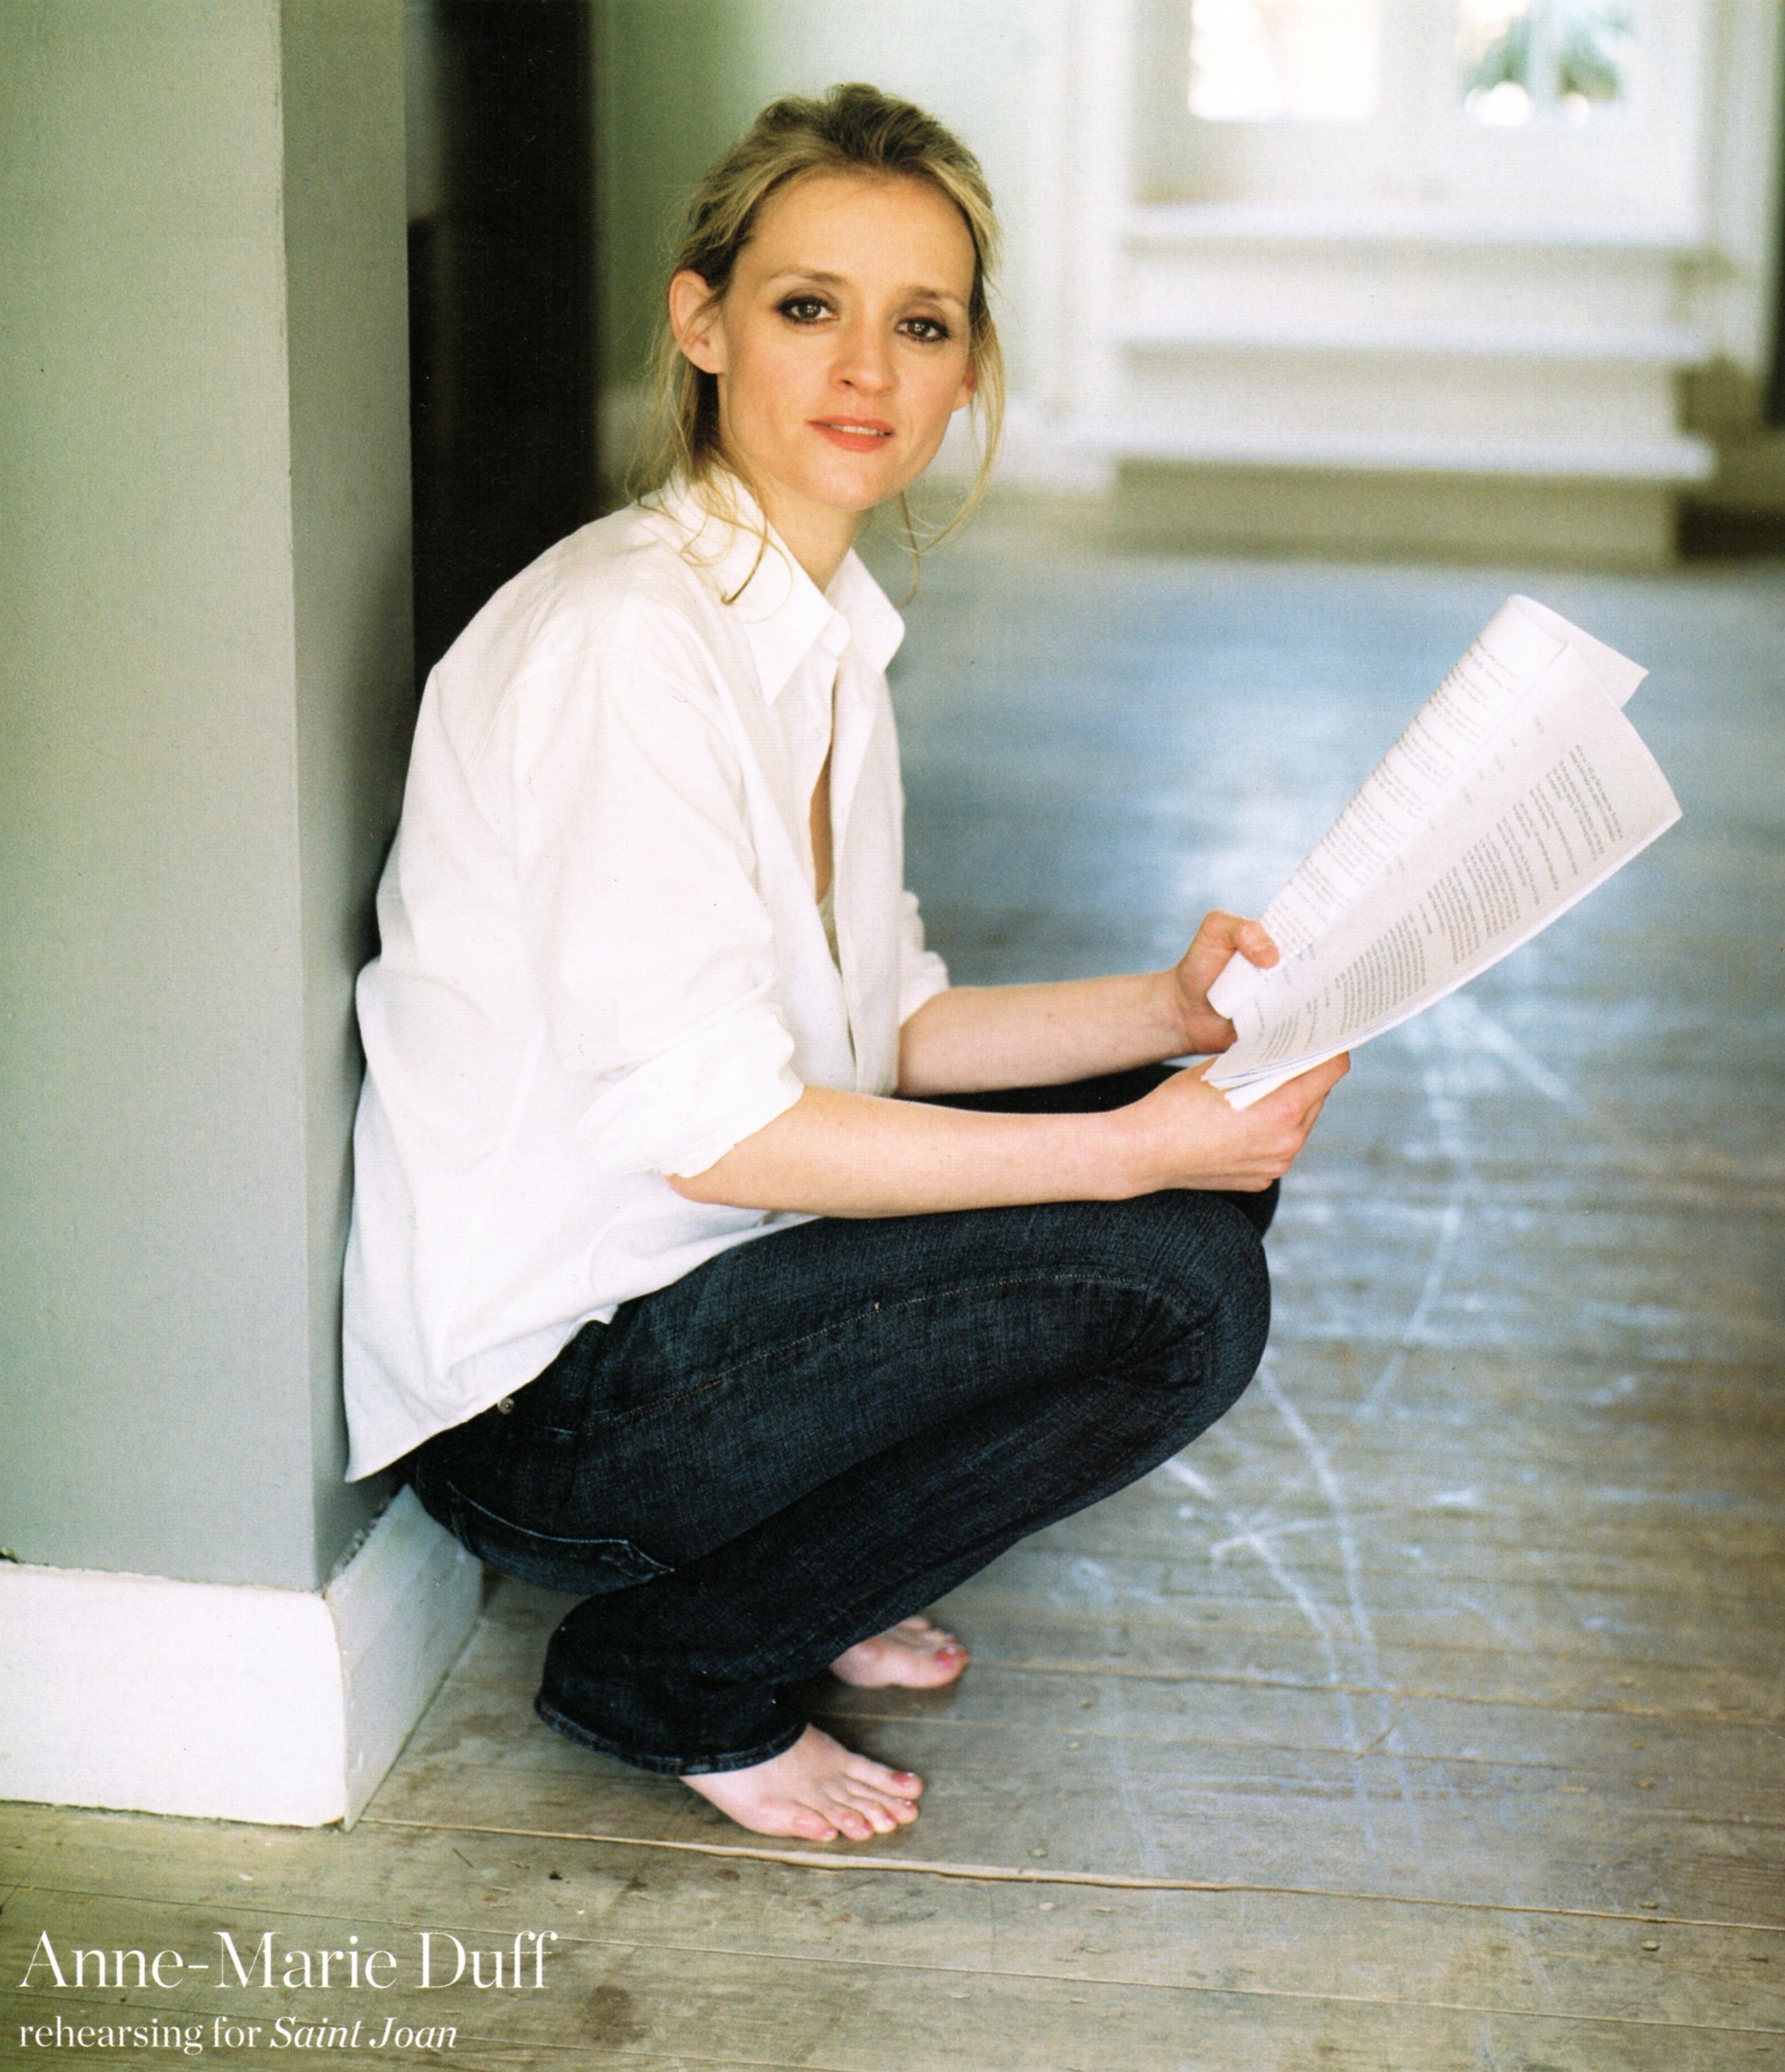 People who liked Anne-Marie Duff's feet, also liked.